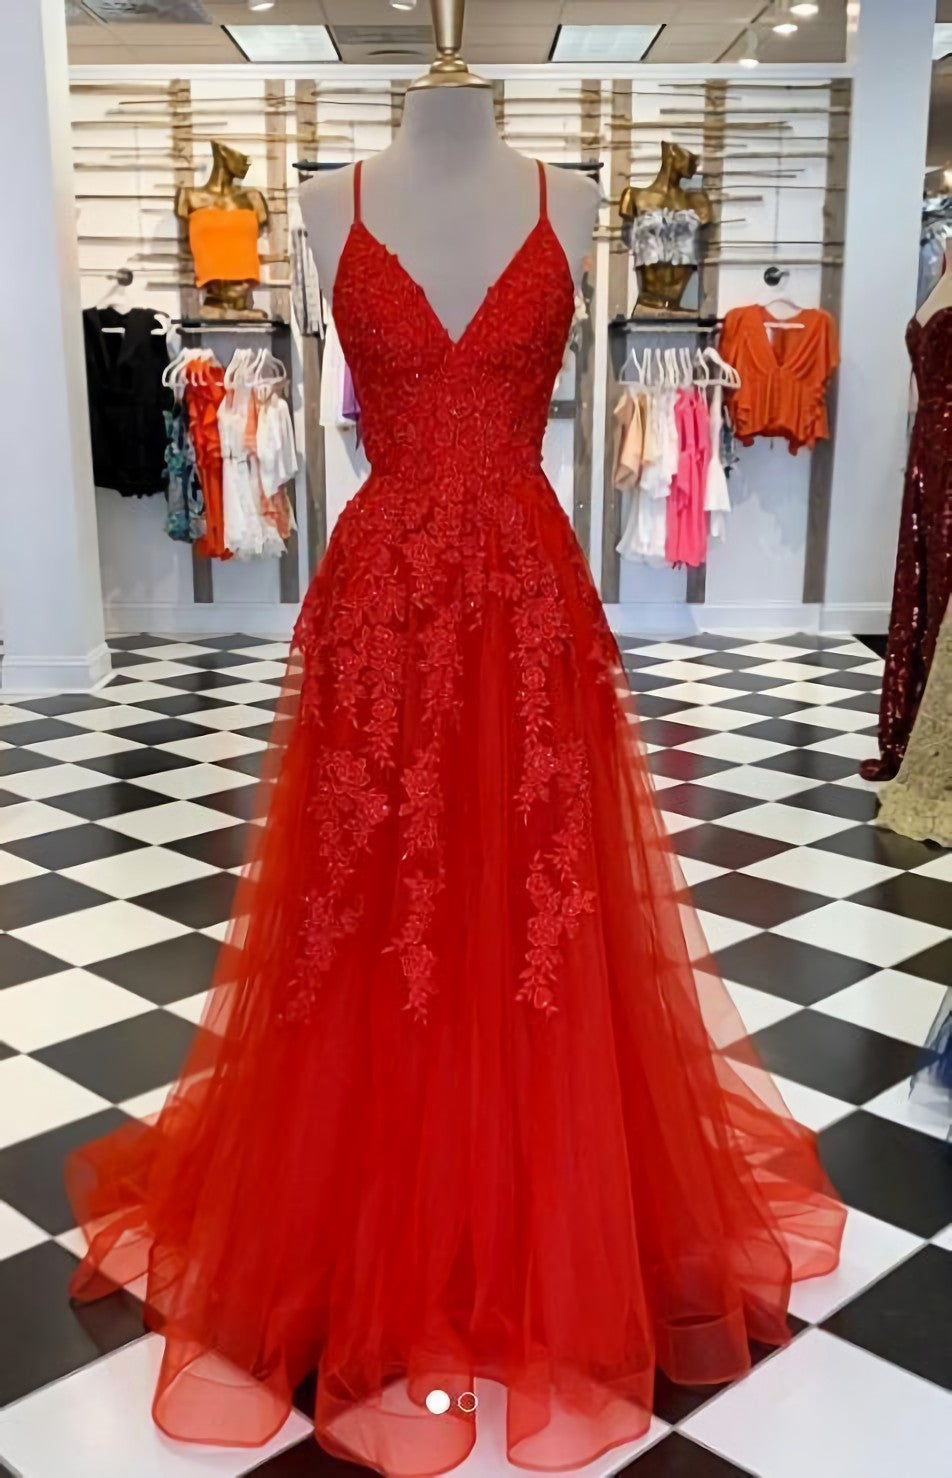 Red Lace Prom Dress, Prom Dresses, Evening Dress Formal Gown Graduation Party Dress, 2693